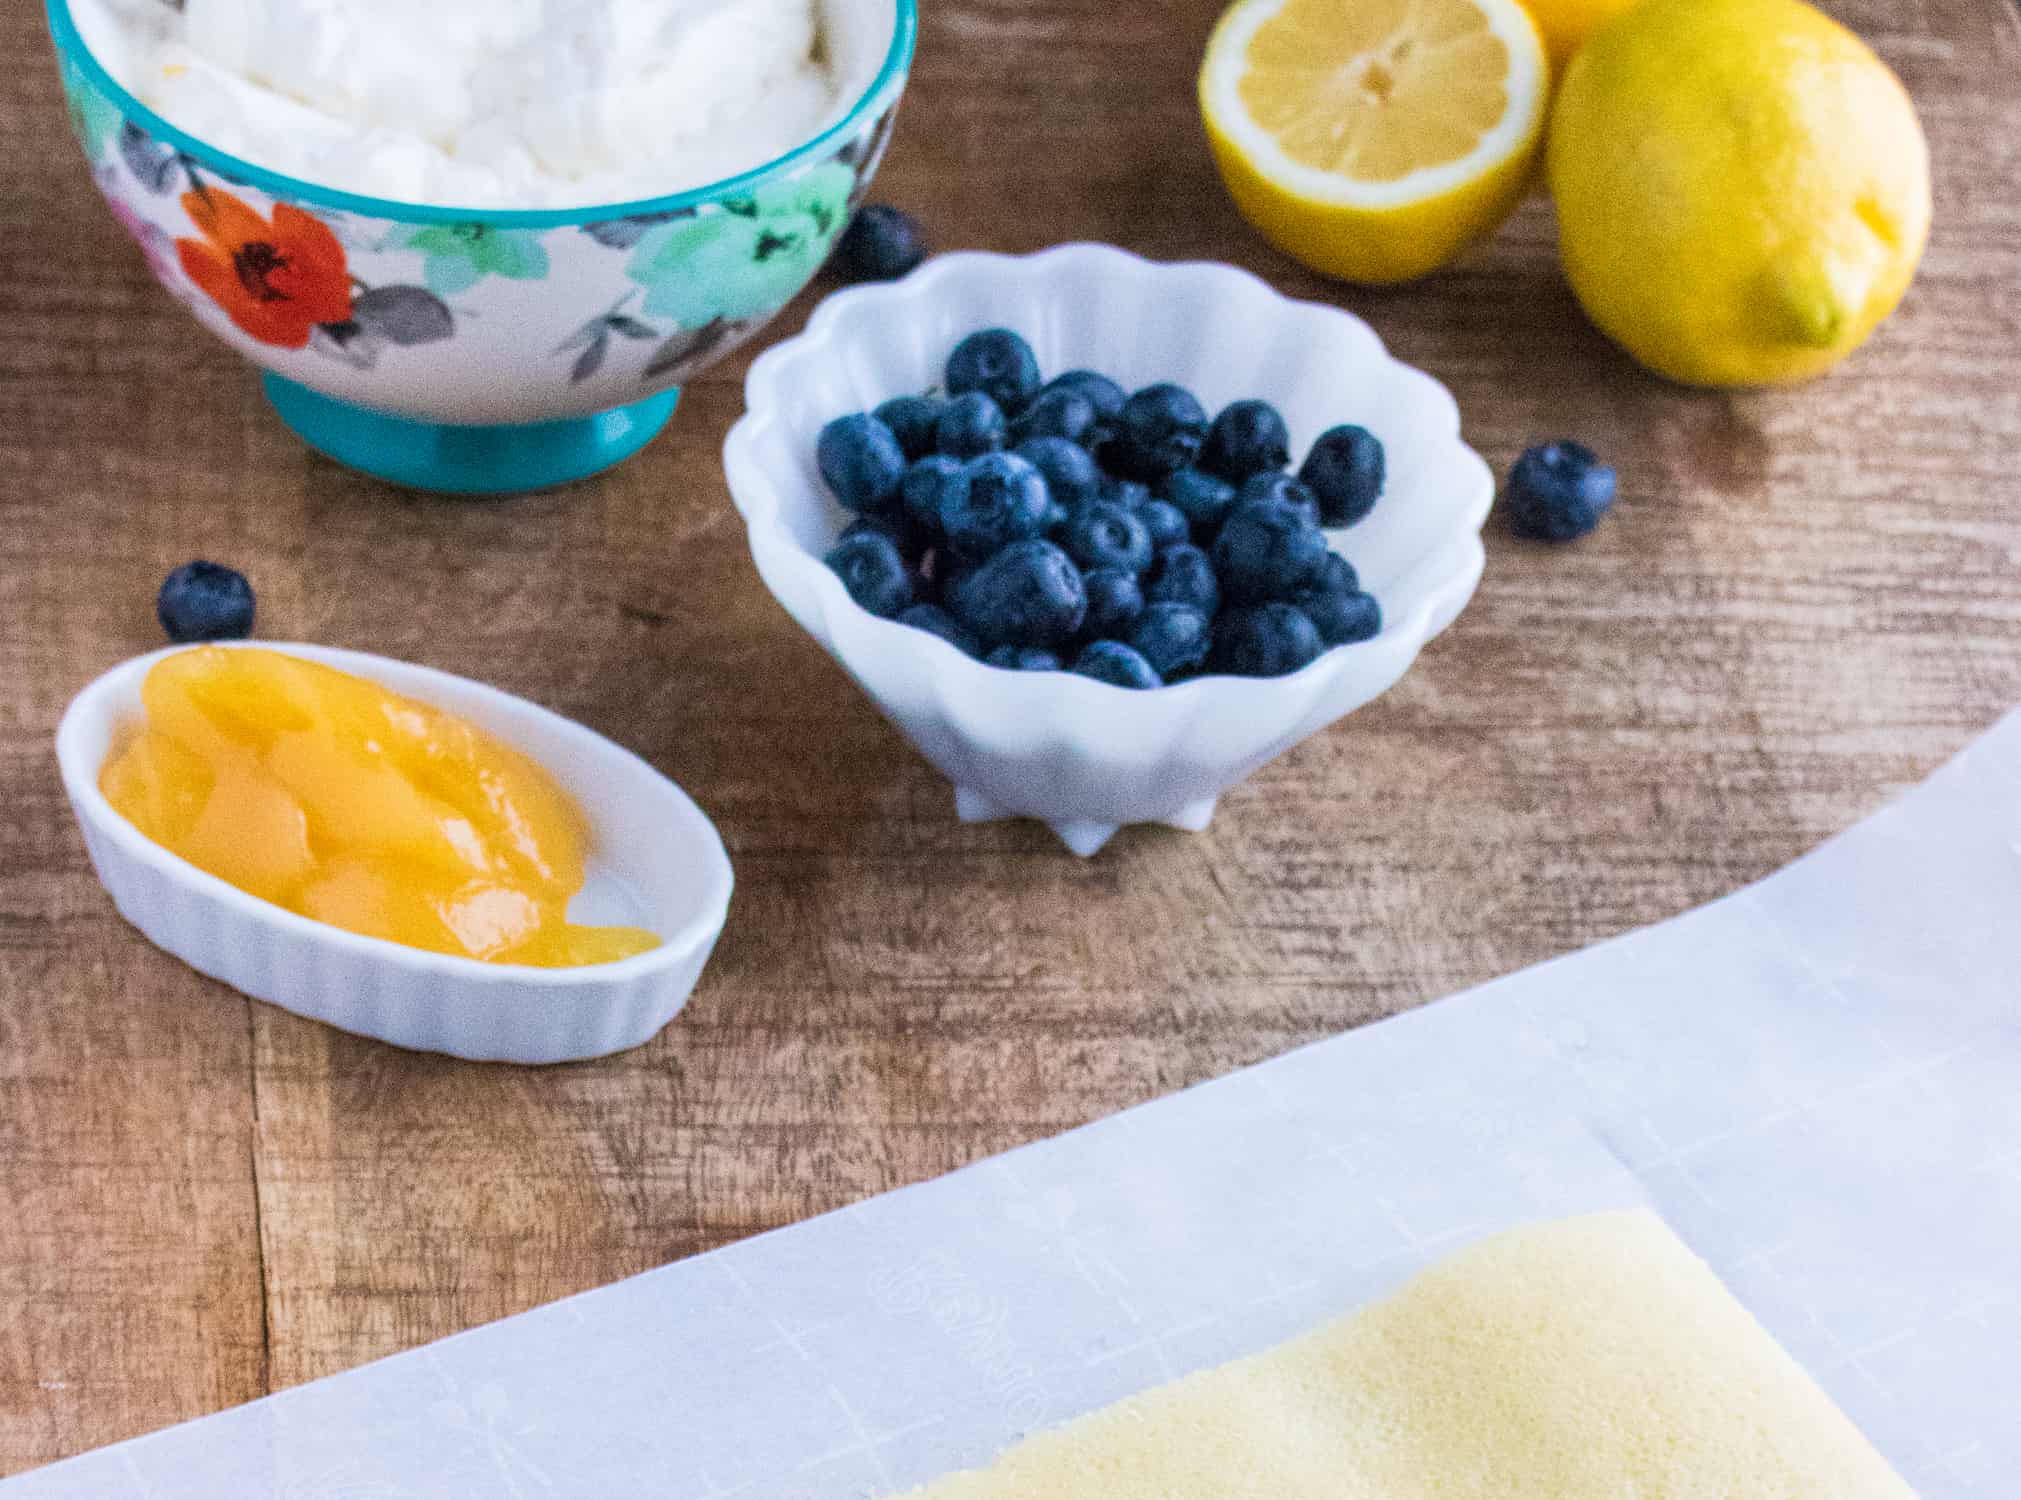 lemon curd in a white bowl, blueberries in a white scalloped bowl, whipped cream in a floral bowl on a wooden table next to lemons and a piece of parchment paper